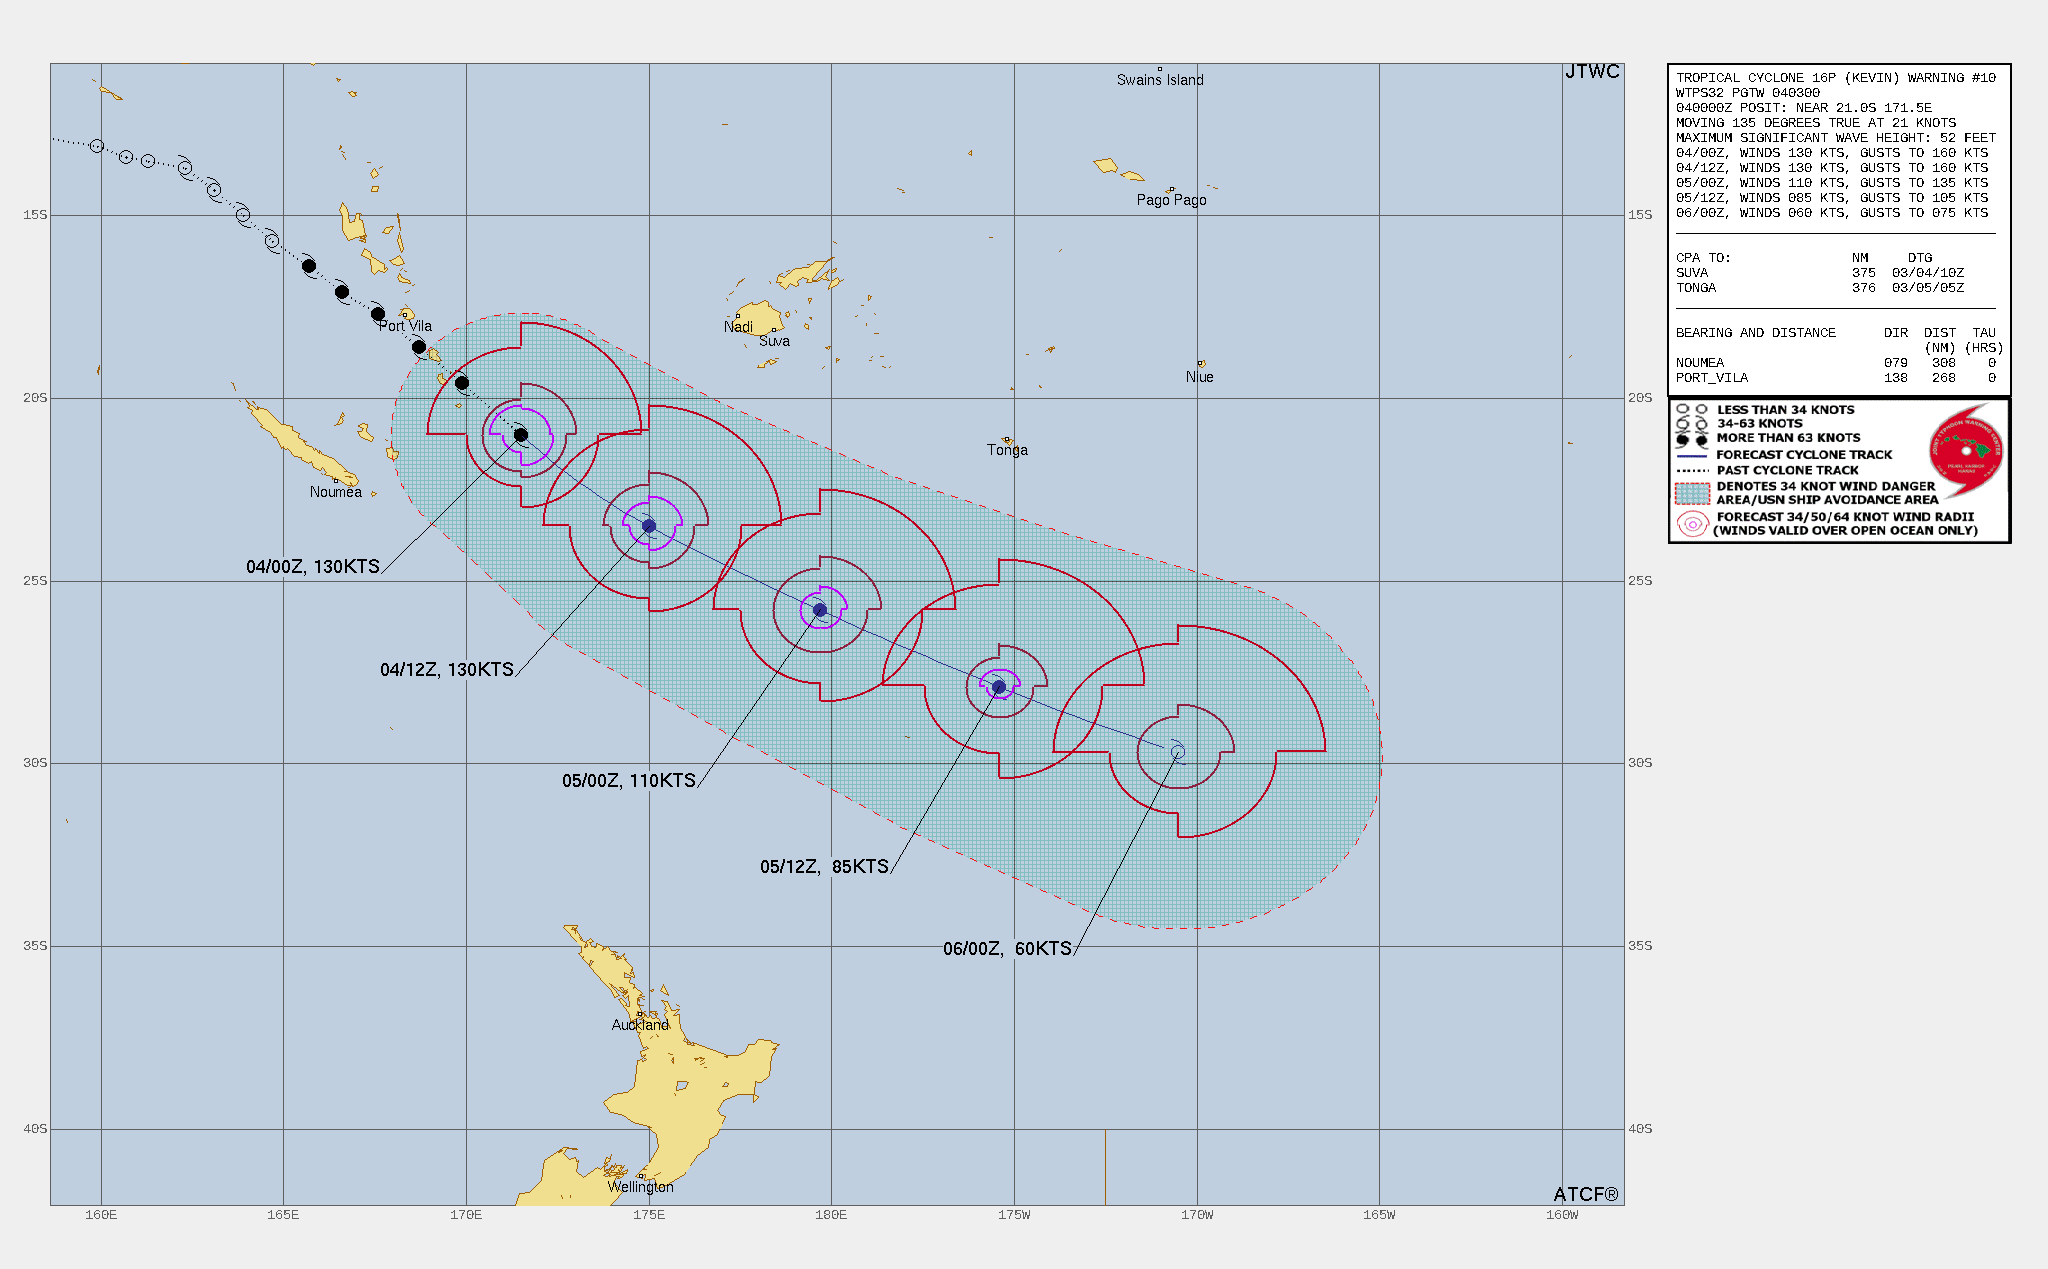 FORECAST REASONING.  SIGNIFICANT FORECAST CHANGES: THERE ARE NO SIGNIFICANT CHANGES TO THE FORECAST FROM THE PREVIOUS WARNING.  FORECAST DISCUSSION: NO SIGNIFICANT CHANGE IN THE FORECAST TRACK IS EXPECTED THROUGH THE FORECAST PERIOD, WITH TC 15P ACCELERATING SOUTHEASTWARD ALONG THE WESTERN SIDE OF THE STEERING RIDGE CENTERED SOUTH OF SAMOA. TRACK SPEEDS ARE LIKELY TO SLOW TOWARDS THE END OF THE FORECAST AS THE STEERING GRADIENT IS ANTICIPATED TO WEAKEN SLIGHTLY. OTHERWISE, THE FORECAST TRACK REMAINS VERY CONSISTENT WITH THE PREVIOUS JTWC FORECASTS. IN TERMS OF INTENSITY, TC 16P HAS CLEARLY EXCEEDED ALL EXPECTATIONS IN REACHING ITS CURRENT INTENSITY. PASSING OVER WATERS ALREADY CHURNED UP BY THE PASSAGE OF TC JUDY, IT APPEARED UNLIKELY THERE WOULD BE ENOUGH ENERGY TO SUPPORT THE SYSTEM REACHING ITS CURRENT INTENSITY. THE STRONG RADIAL OUTFLOW COMBINED WITH A TAP INTO THE DIVERGENT POLEWARD OUTFLOW ON THE UPSTREAM SIDE OF A MID-LATITUDE TROUGH FUELED RAPID AXISYMMETRIZATION AS THE SYSTEM MOVED INTO OPEN WATERS. THESE FACTORS WERE LIKELY JUST ENOUGH TO OFFSET THE RELATIVELY LOW OHC AVAILABLE AND ENABLED THE ERI SEEN THIS MORNING. BUT AS THE CIMSS SHEAR ANALYSIS REVEALS, CONDITIONS ARE ALREADY STARTING TO CHANGE, WITH SHEAR NOW UP TO ABOUT 15 KNOTS. SHEAR IS EXPECTED TO CONTINUE TO RISE SHARPLY OVER THE NEXT 12 HOURS OR SO, AND IS EXPECTED TO REACH 30 KNOTS BY ABOUT TAU 12 AND INCREASING RAPIDLY THEREAFTER. IN THE NEXT SIX HOURS OR SO, TC 16P WILL LIKELY PEAK AT 135-140 KNOTS, AS EVIDENCED BY THE CONTINUING UPTICK IN ADT ESTIMATES. BUT BY TAU 12 IT WILL START TO FEEL THE EFFECTS OF THE INCREASING SHEAR AND A DECREASE IN AVAILABLE ENERGY AS IT MOVES INTO STEADILY COOLER WATERS AND BEGIN TO WEAKEN. BY TAU 36, SHEAR WILL INCREASE AGAIN TO OVER 45 KNOTS, AND EFFECTIVELY DECAPITATE THE SYSTEM, LEADING TO RAPID WEAKENING. SIMULTANEOUSLY THE SYSTEM WILL BE SMOTHERED BY MID-LEVEL DRY AIR ENCROACHING FROM THE WEST, MARKING THE START OF SUBTROPICAL TRANSITION (STT). BY TAU 48, THE REMNANT LOW-LEVEL CIRCULATION THAT WAS ONCE TC 16P, WILL COMPLETE STT AS A STRONG GALE-FORCE SUBTROPICAL LOW.